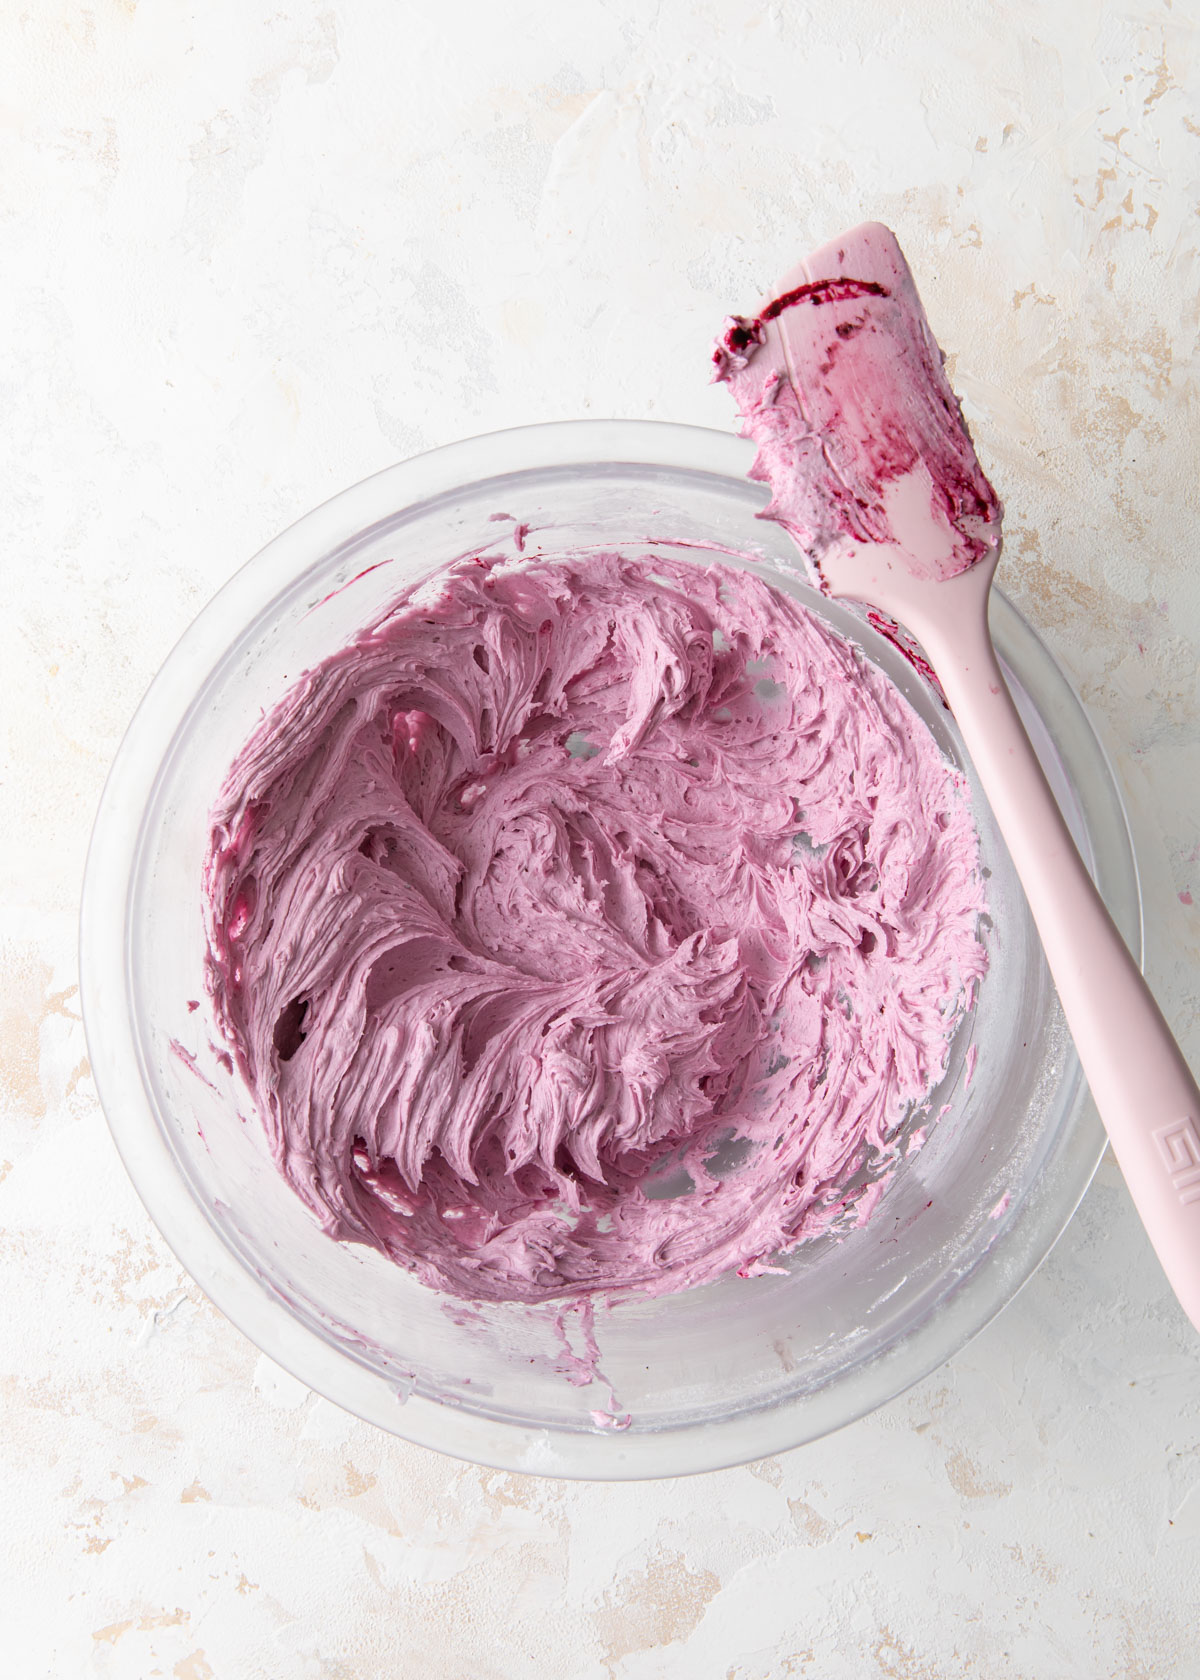 A bowl of fluffy blueberry buttercream on a white table